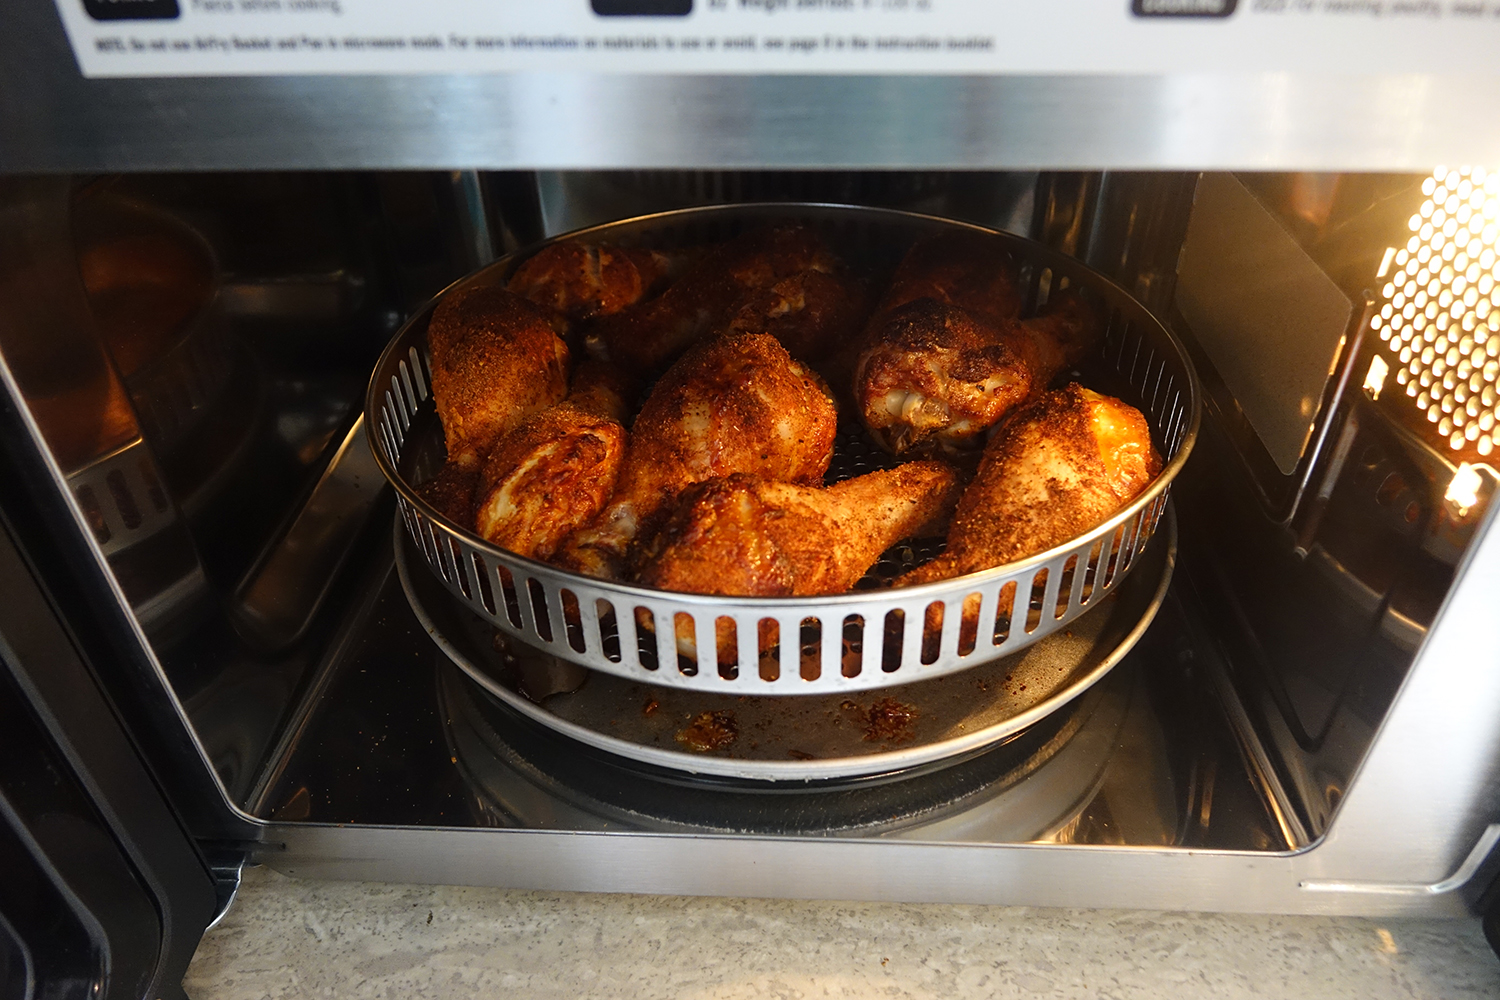 Cuisinart 3-in-1 Microwave Air Fryer Oven